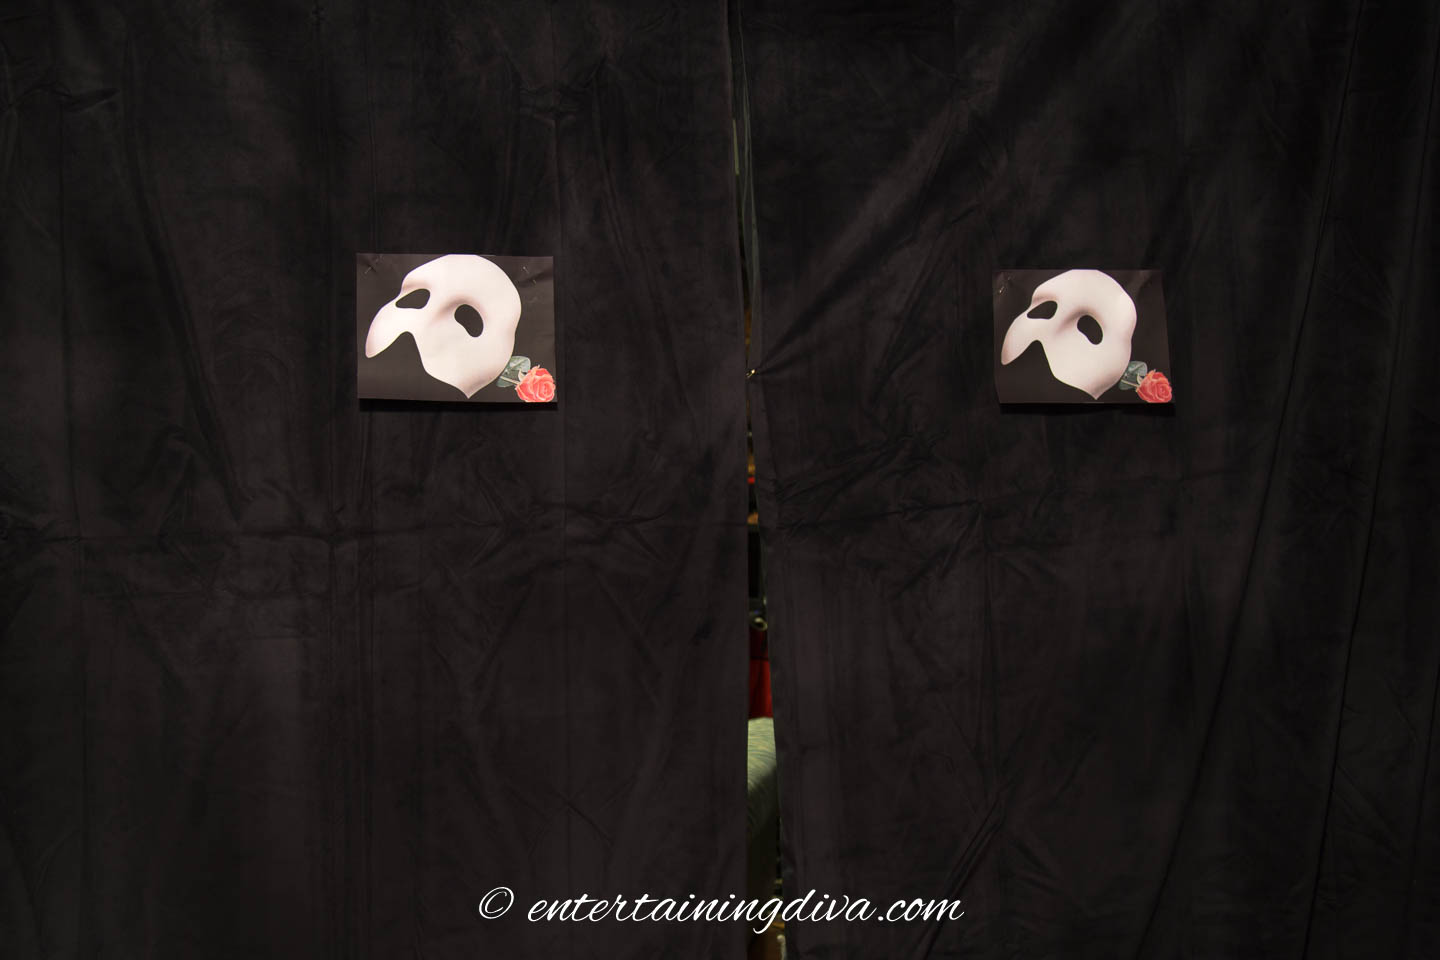 Black velvet curtains with Phantom of the Opera mask pictures on the front of them